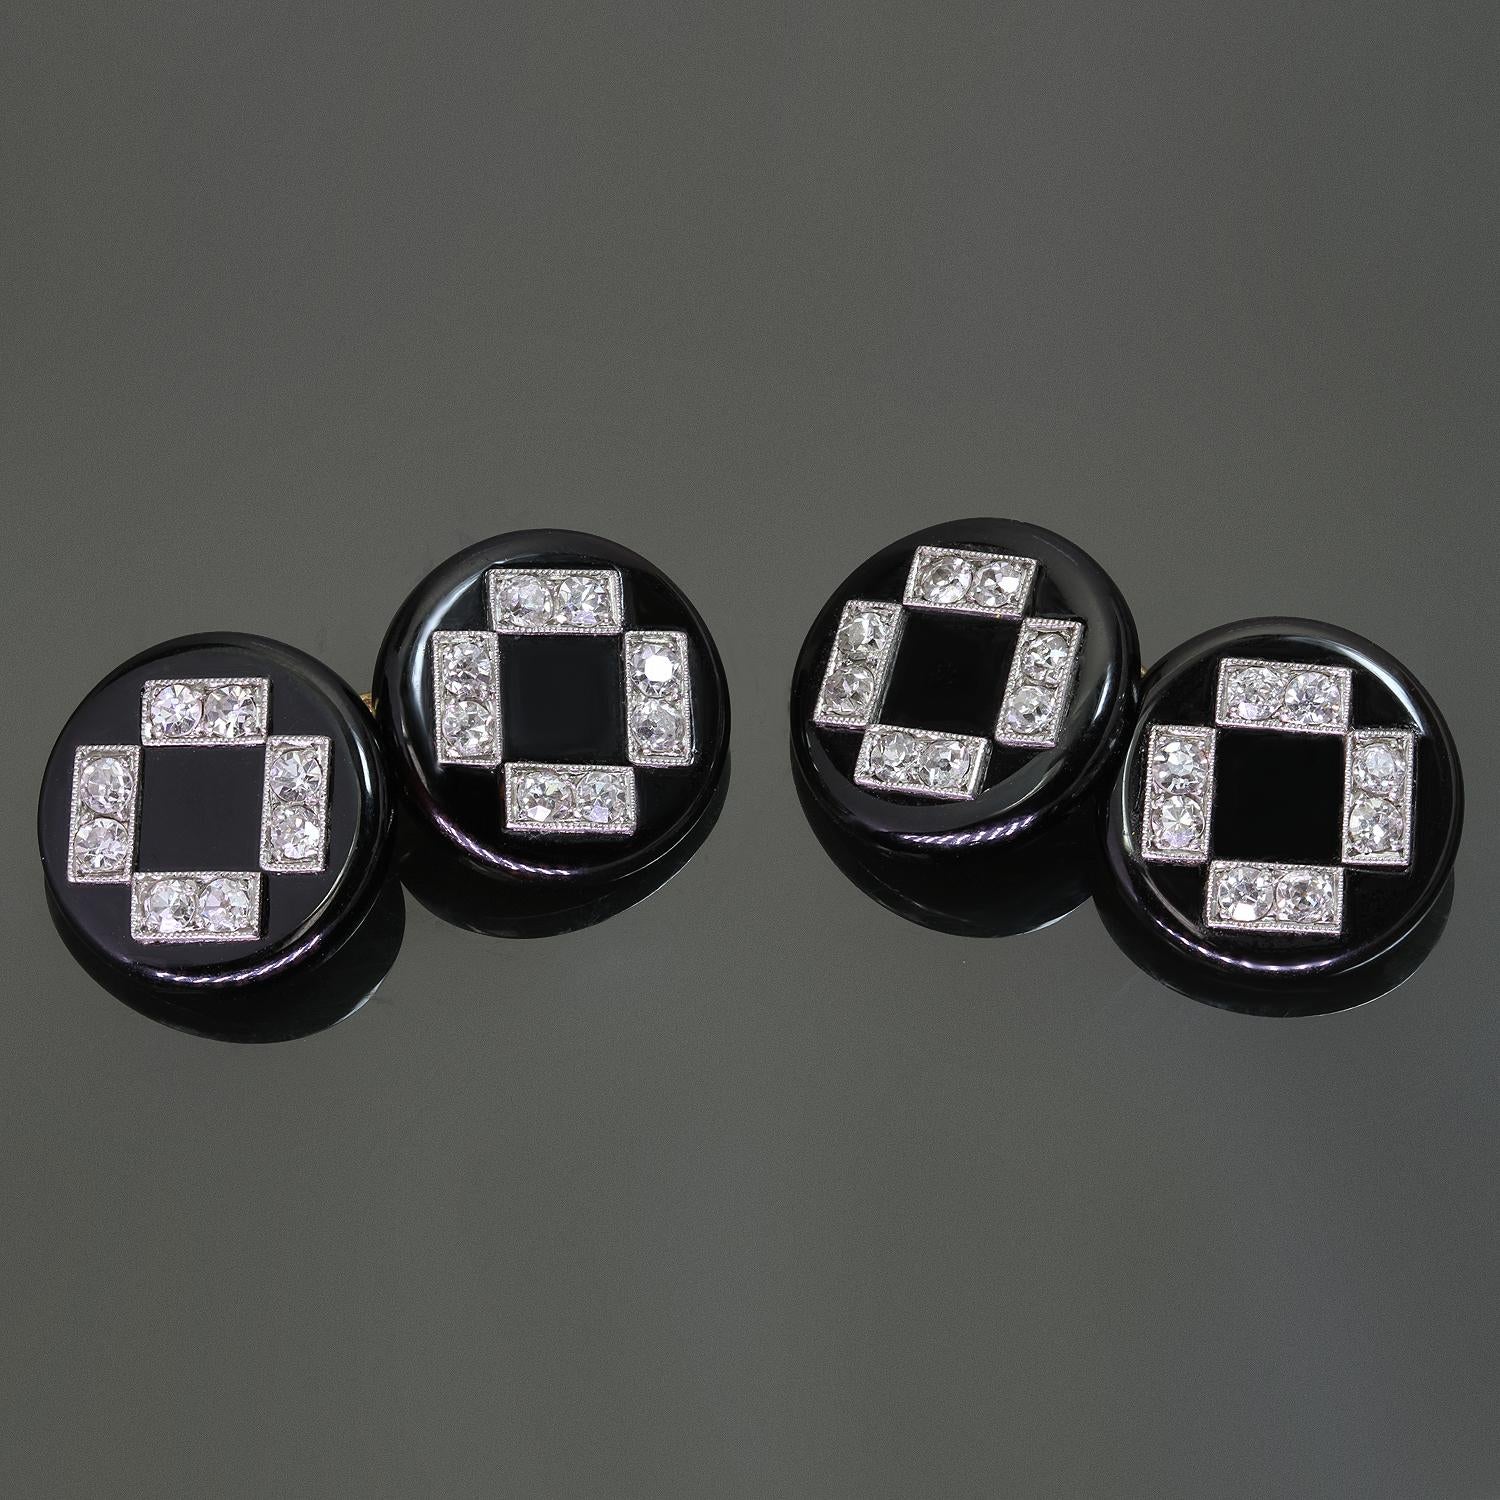 These exquisite Cartier Art Deco round cufflinks are crafted in platinum and black onyx and set with old mine-cut G-H VS1-VS2 diamonds weighing an estimated 0.60 carats. Made in France circa 1915 - 1920. Signed and Numbered.  Measurements: 0.55